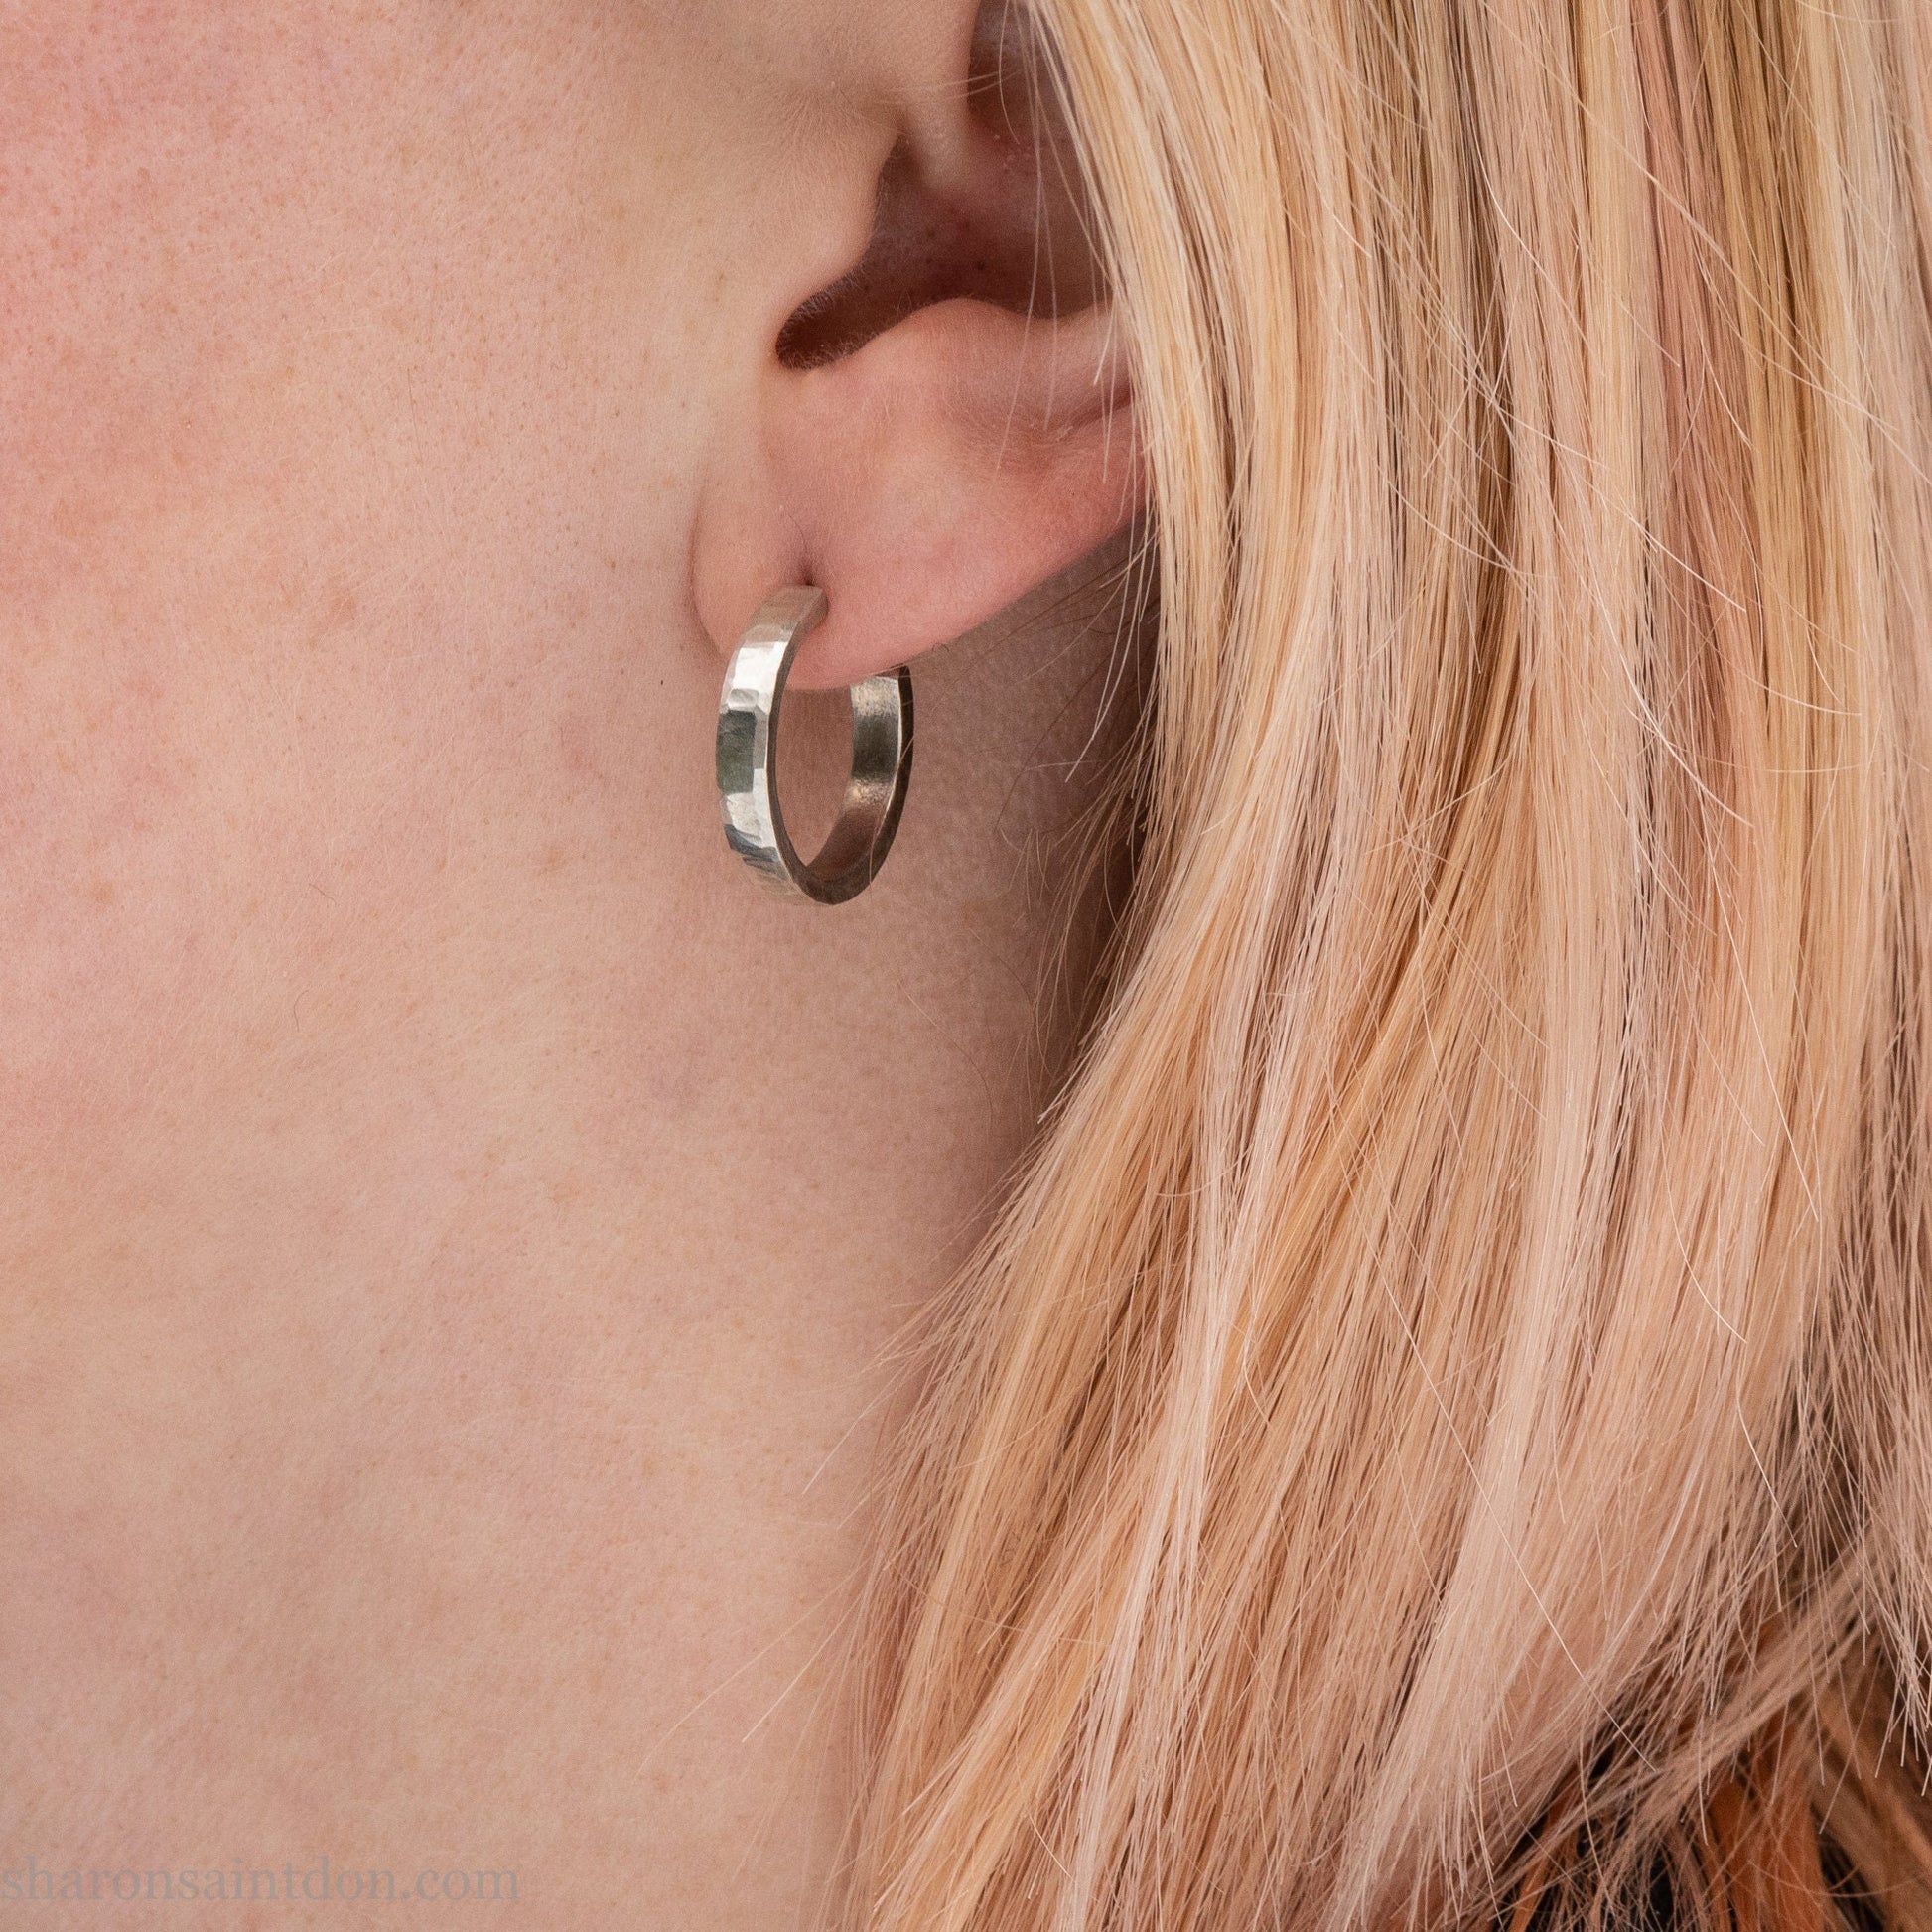 925 sterling silver hoop earrings handmade in North America by Sharon SaintDon. Small, round with hammered texture.